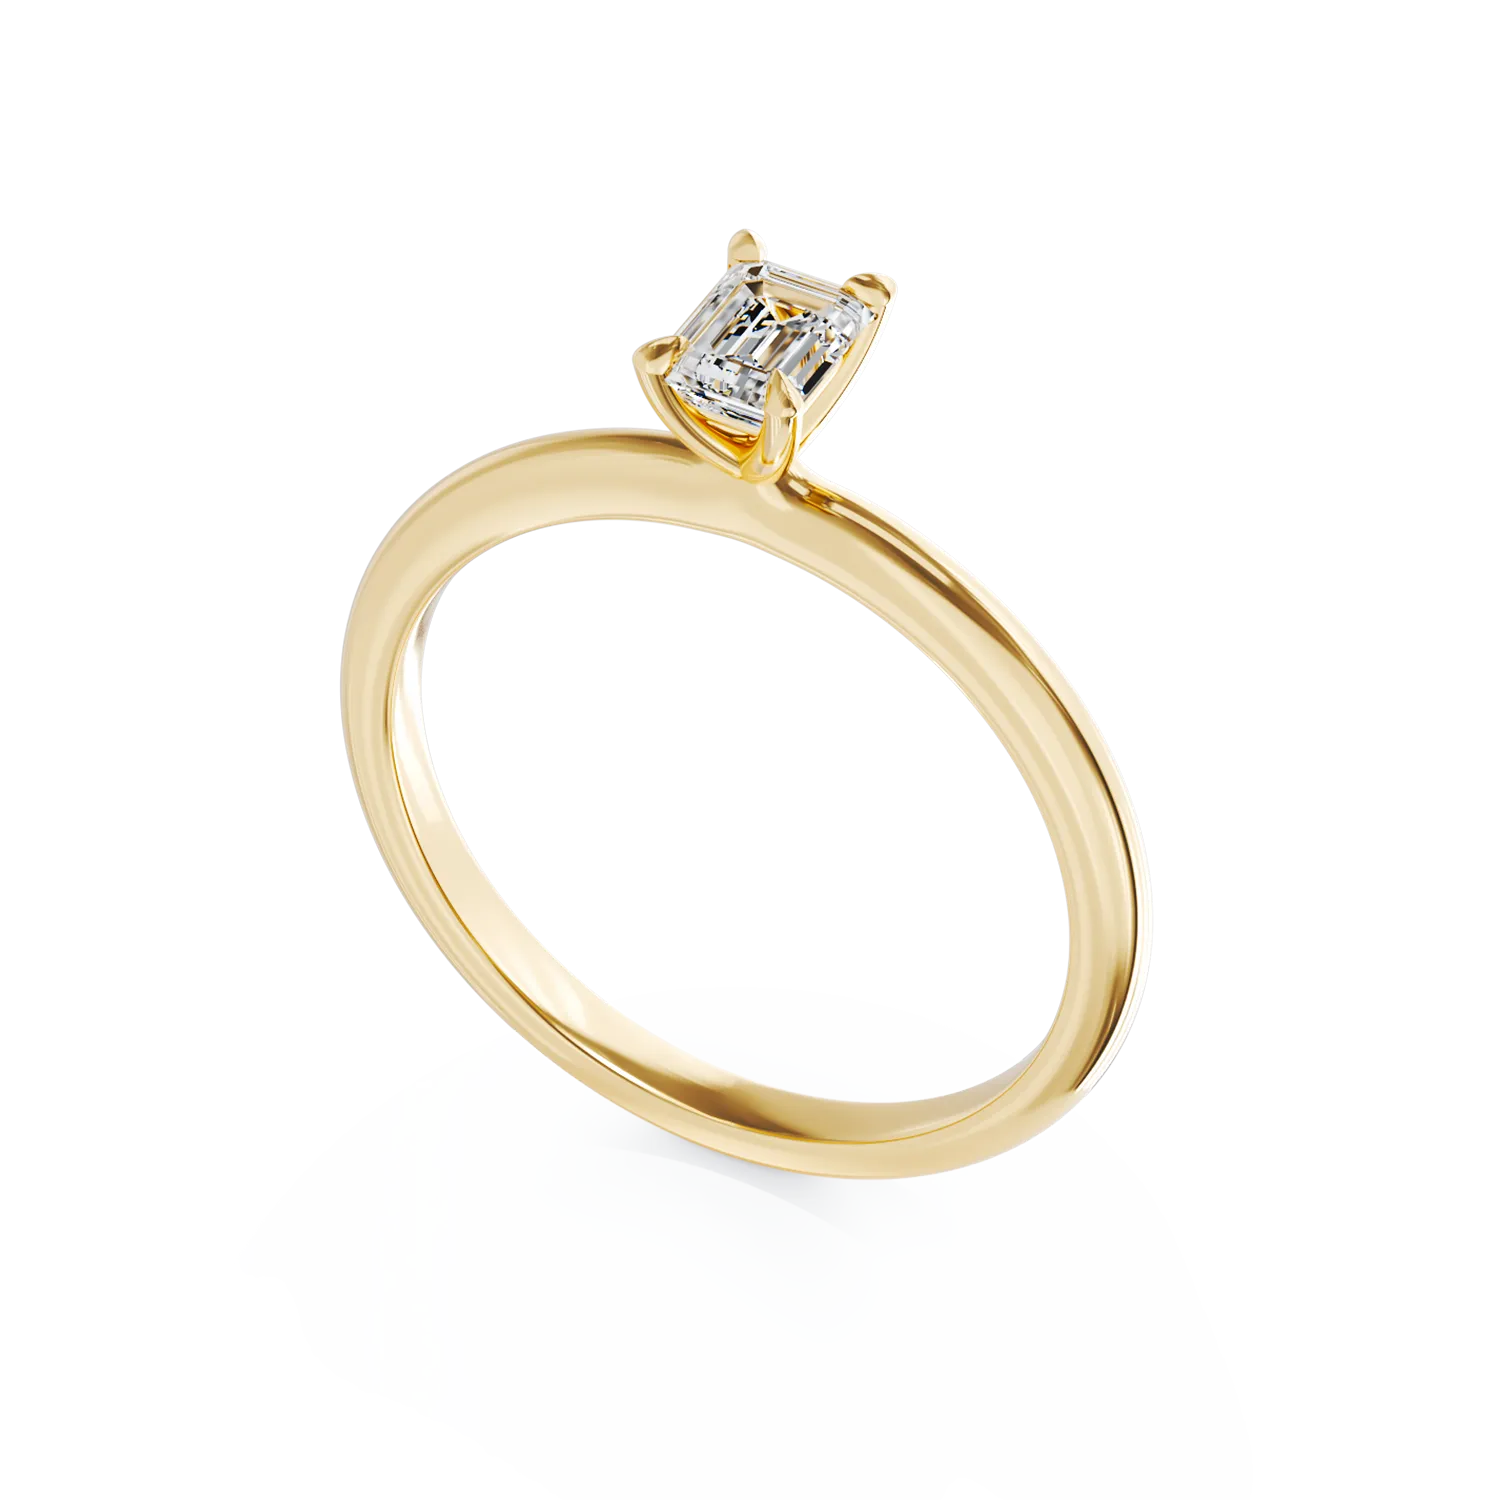 18K yellow gold engagement ring with diamonds of 0.3ct